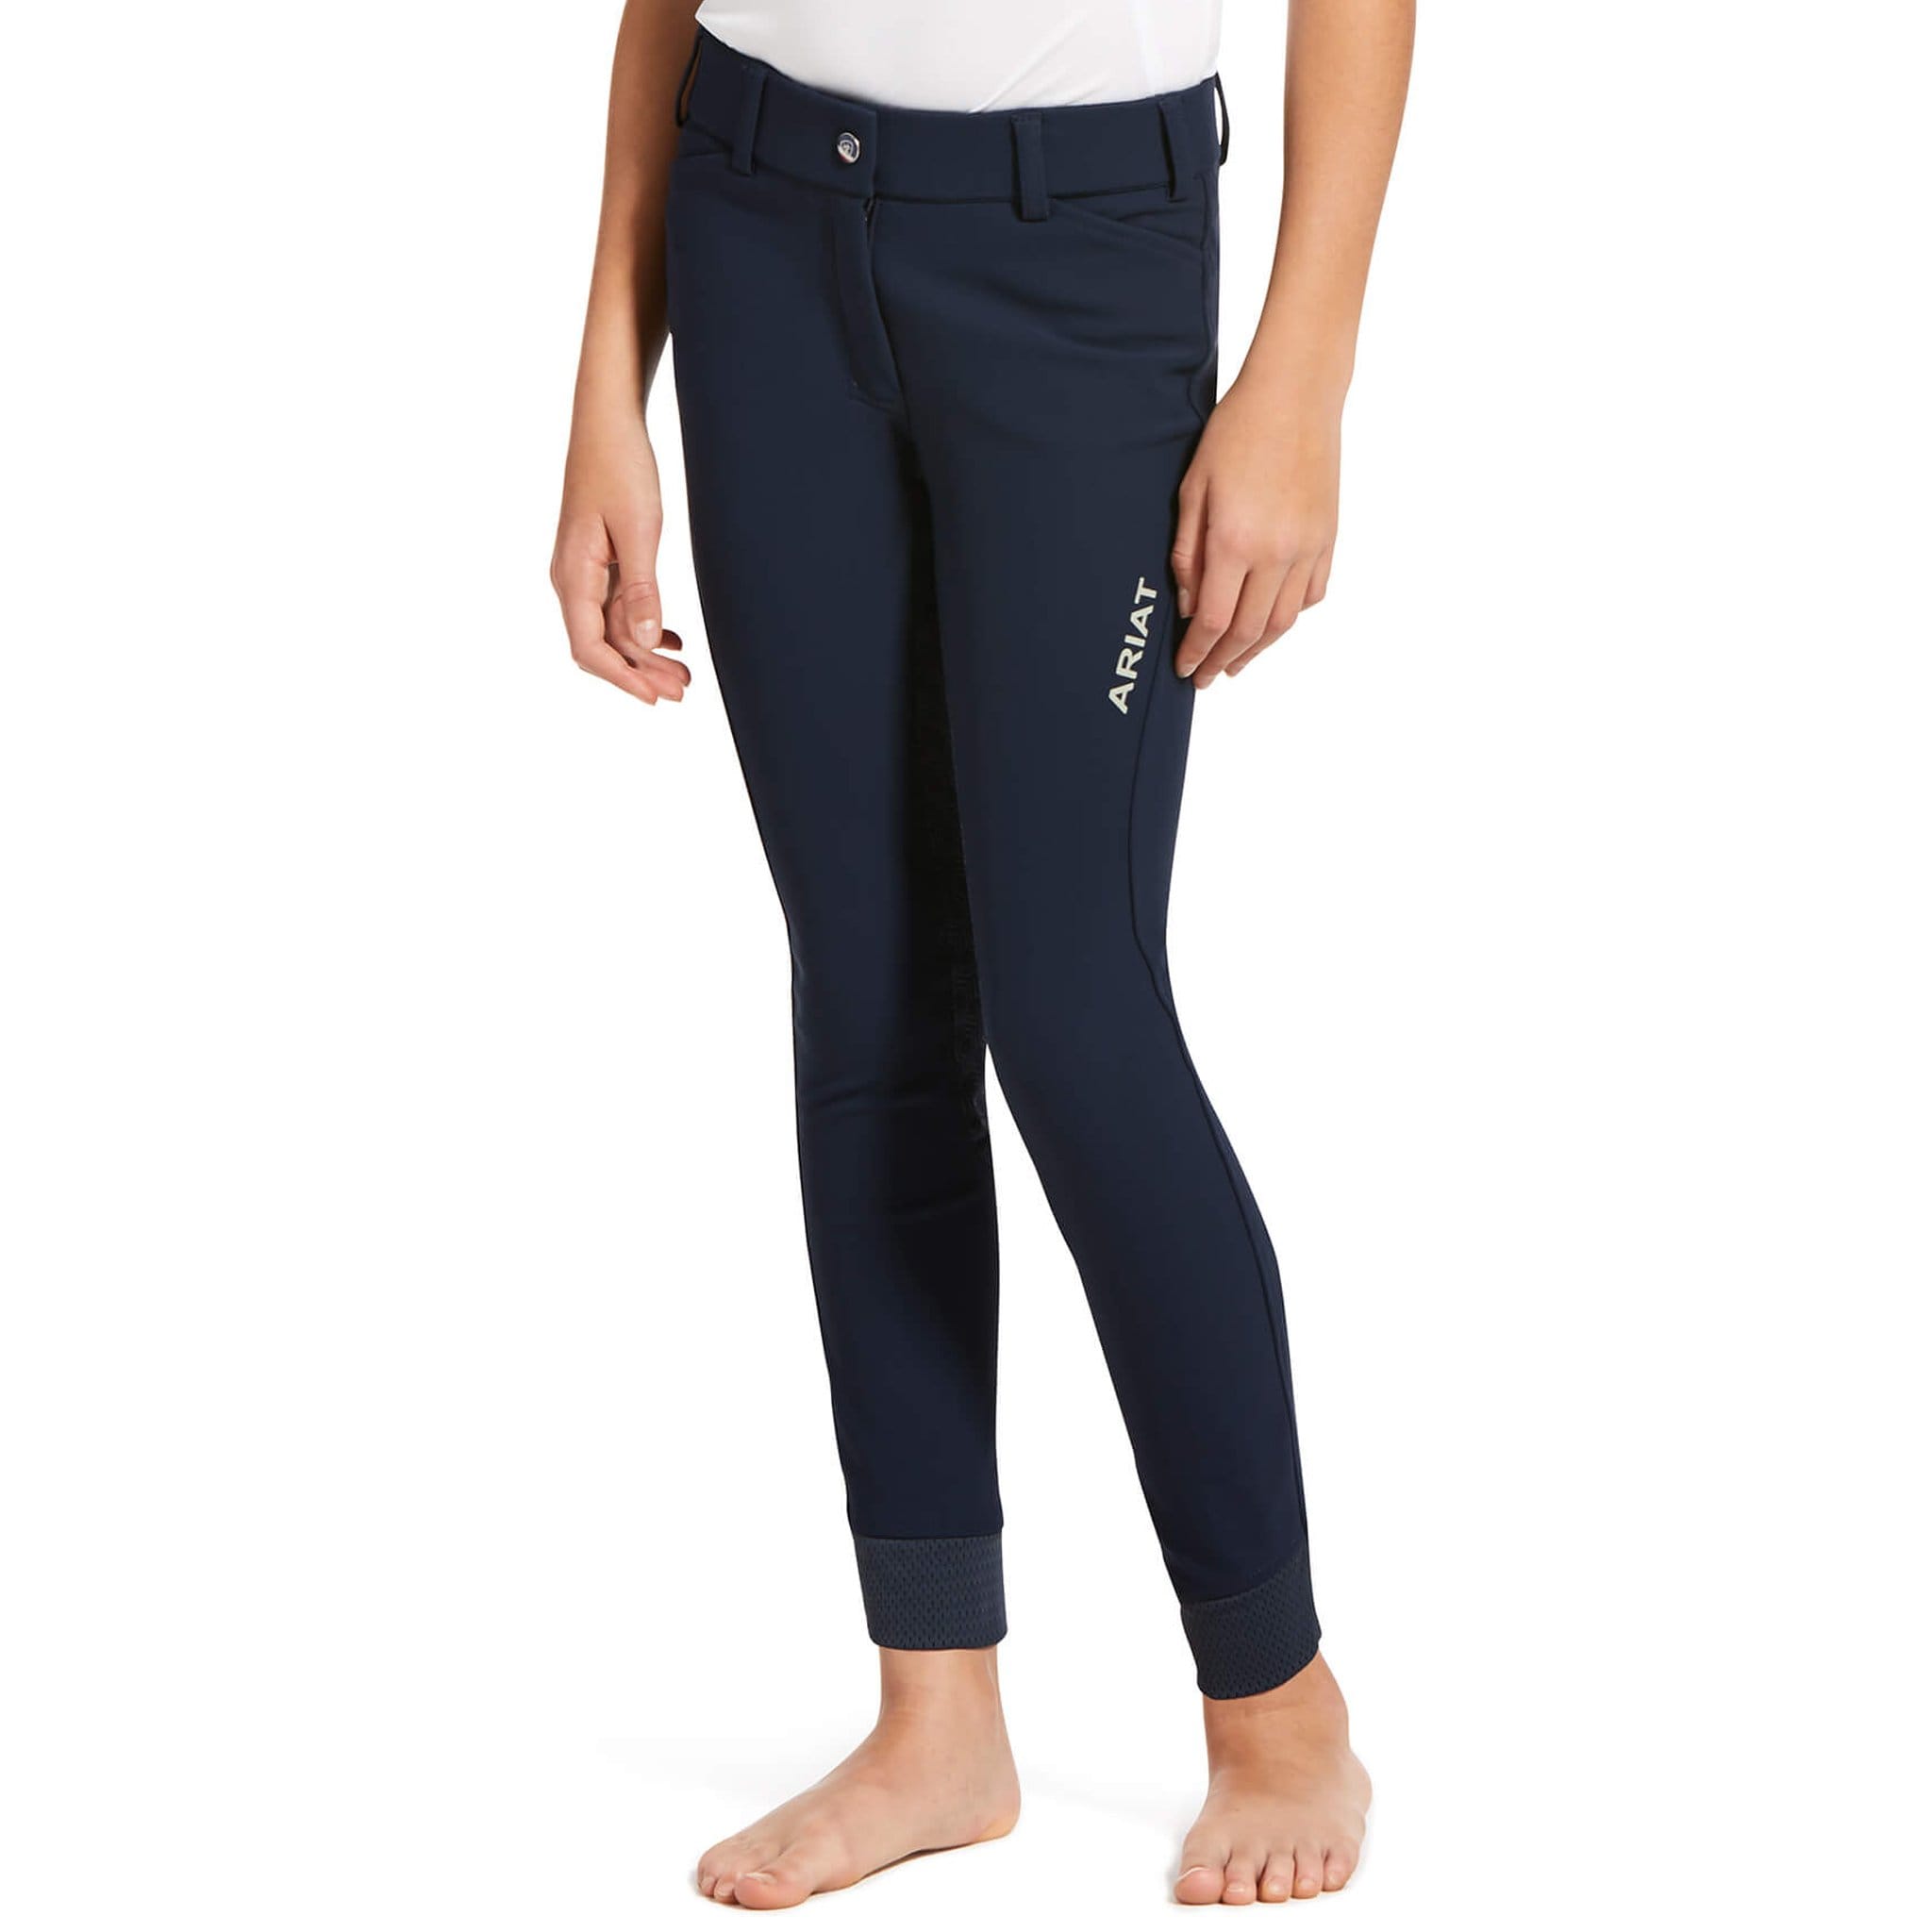 Ariat Youth Tri Factor Grip Silicone Full Seat Breeches Navy Front 10033313